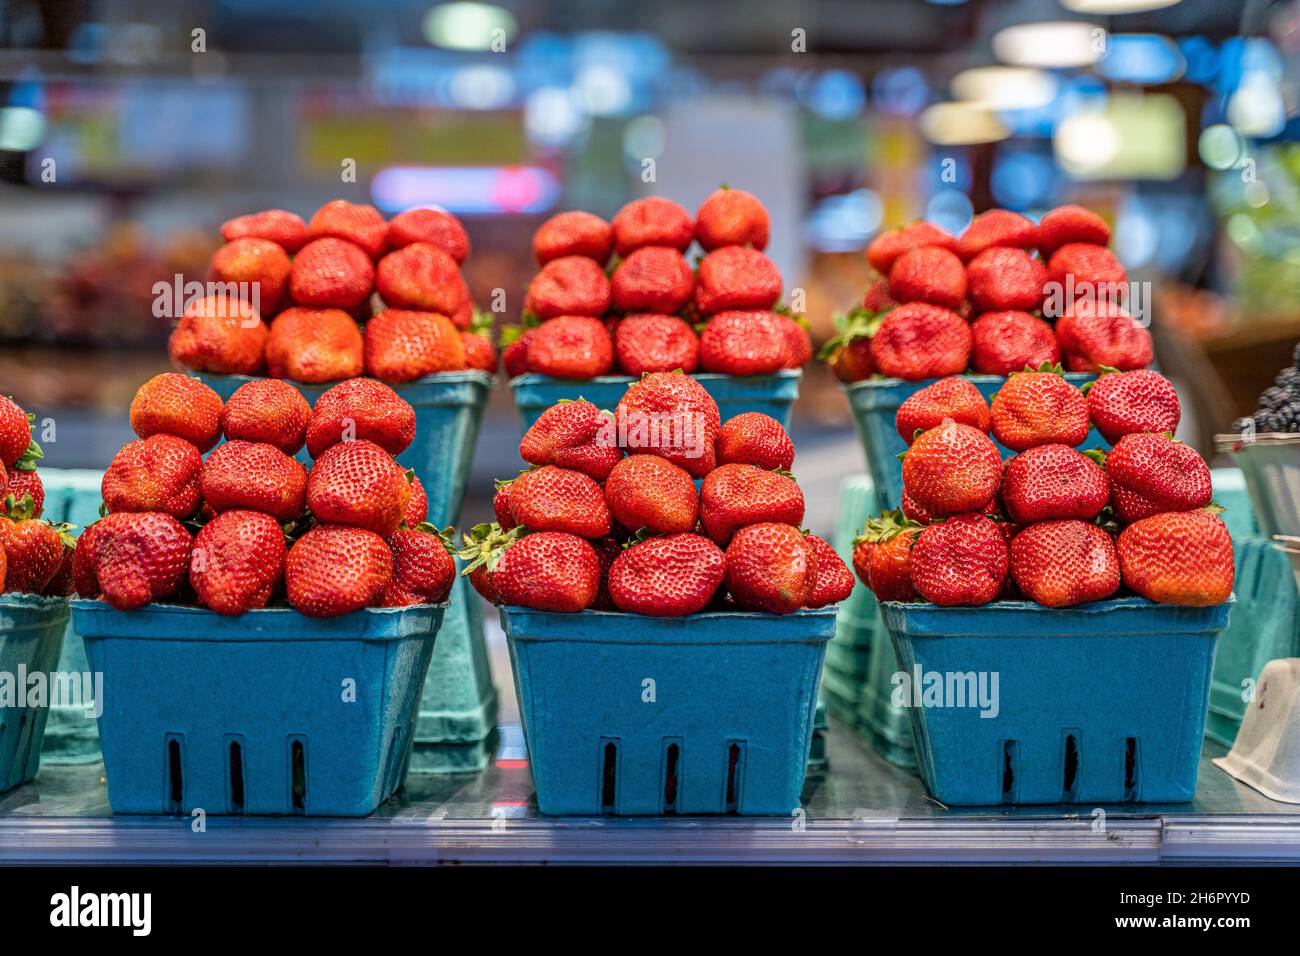 Market shelf with six boxes full of giant delicious strawberries on display for sale Stock Photo